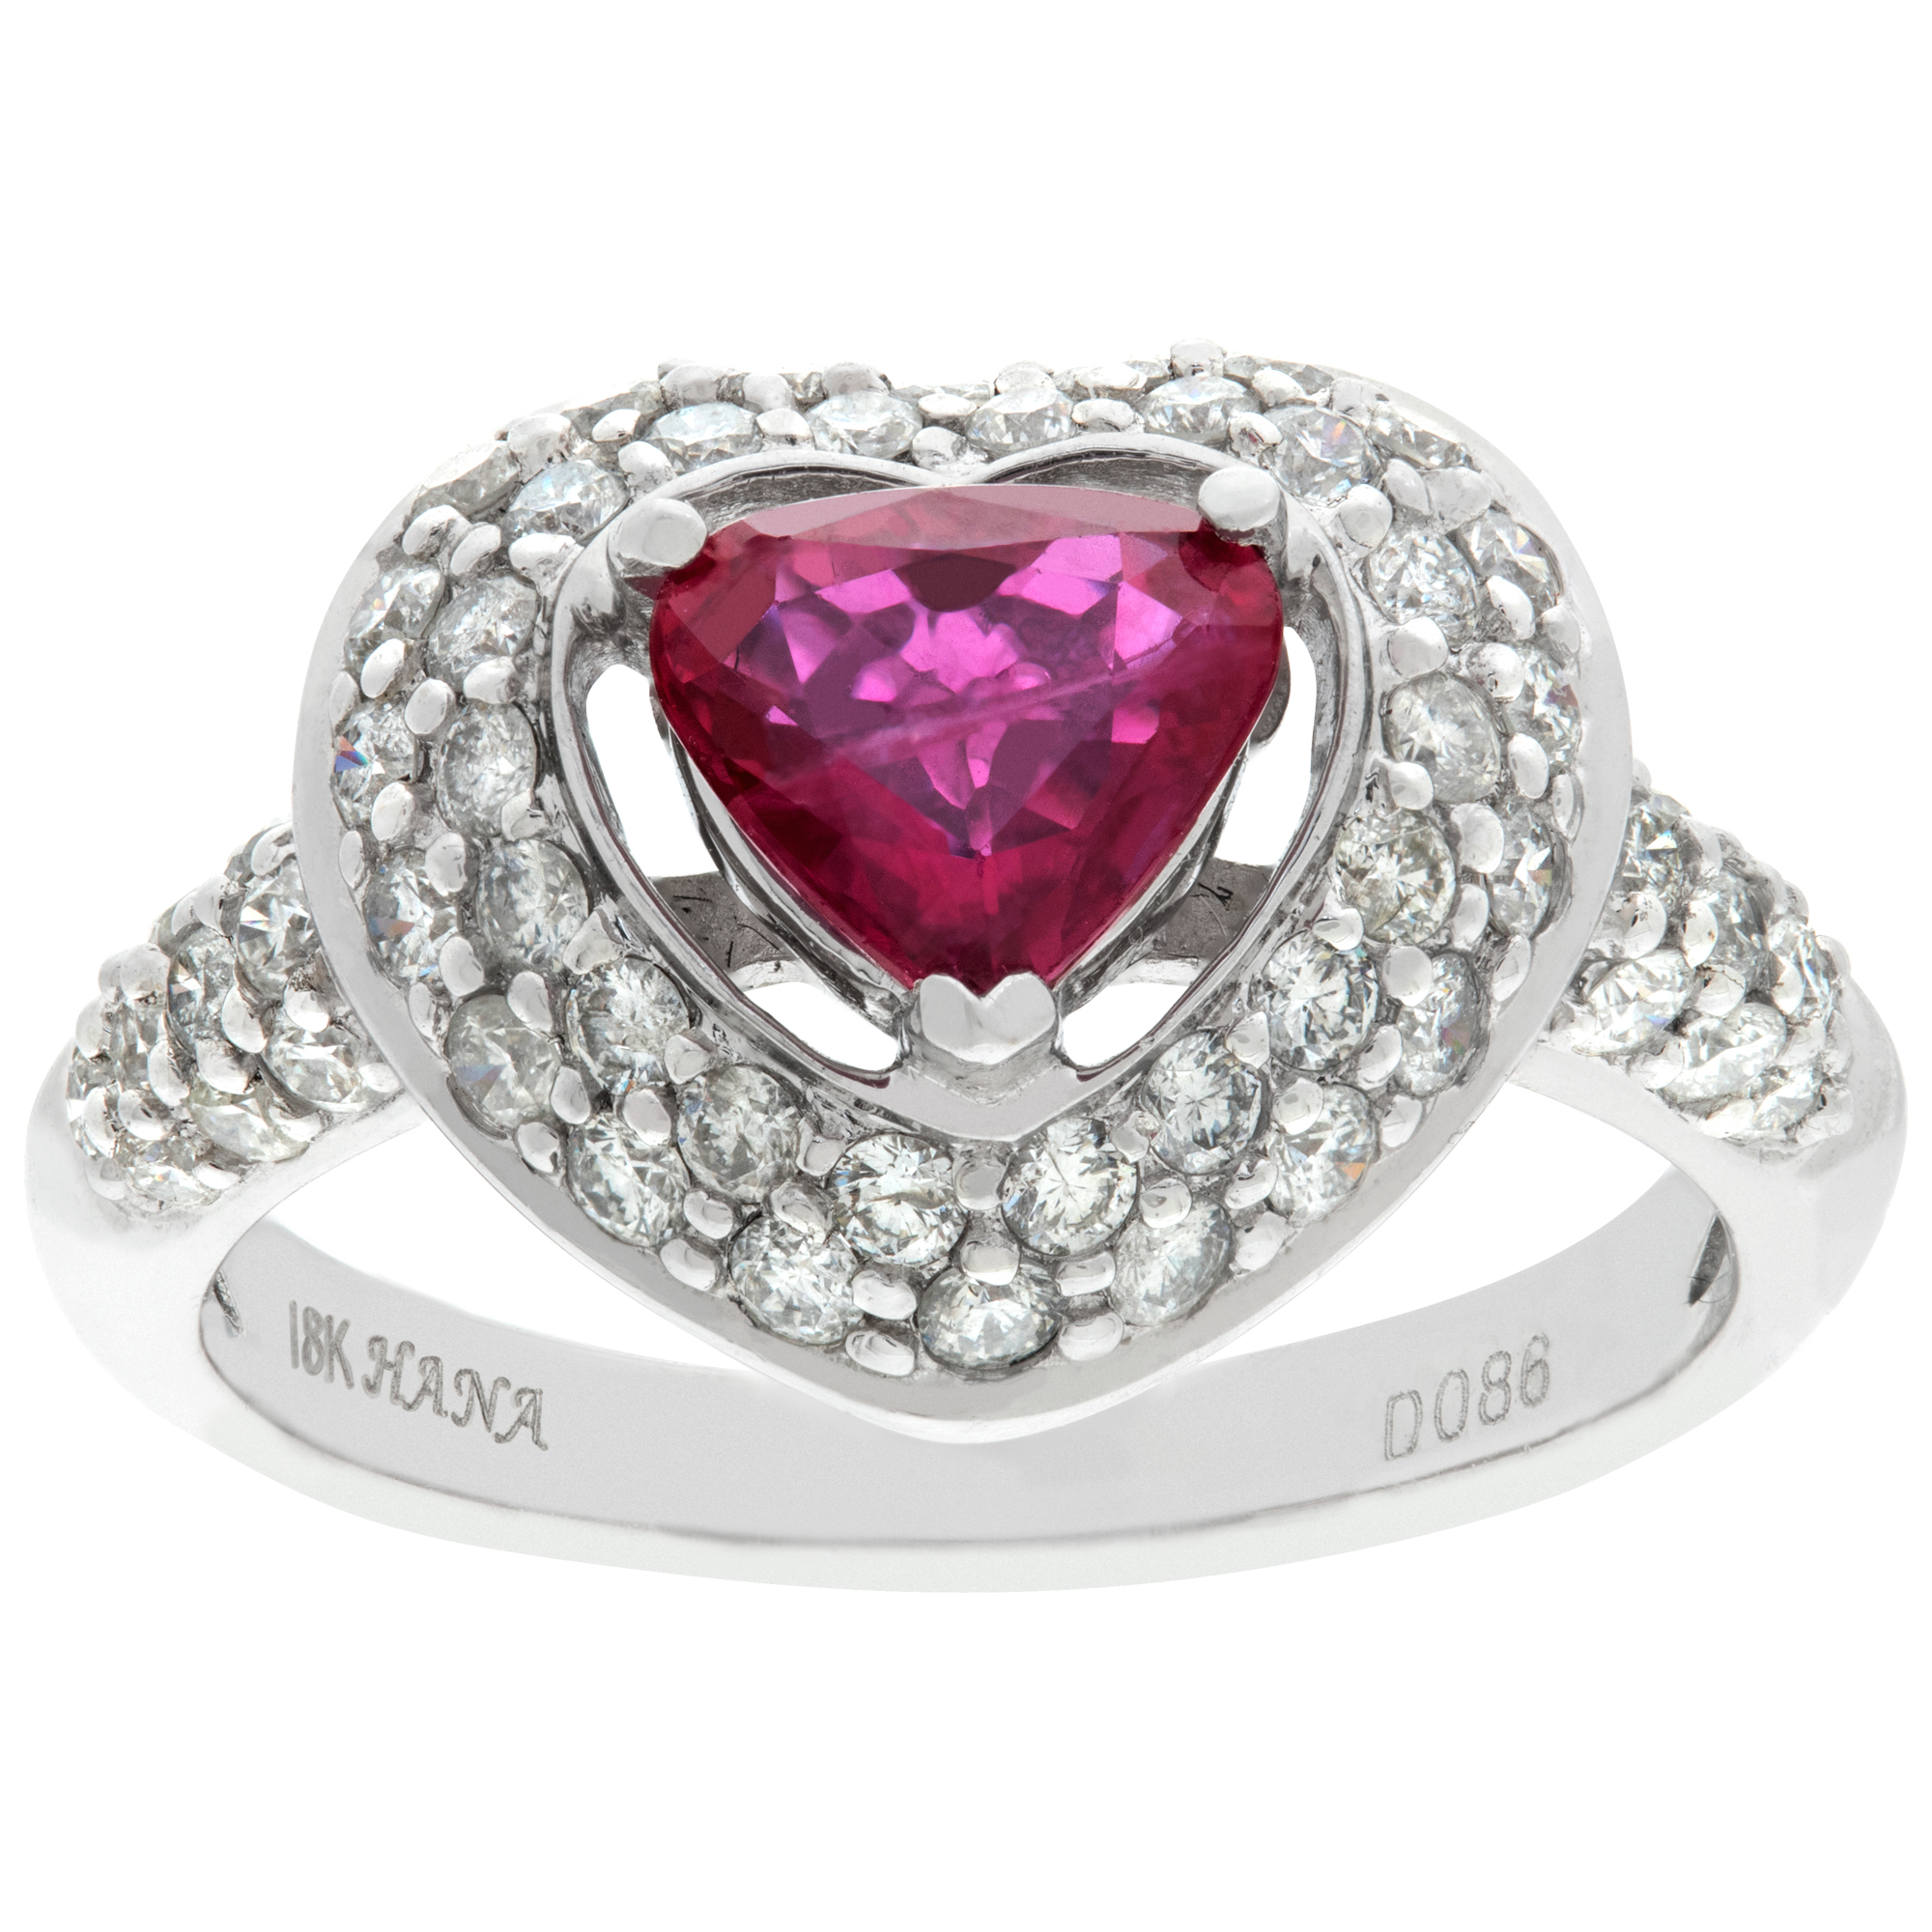 Heart shaped ring with center ruby and surrounded by pave set diamonds in 18k white gold image 1